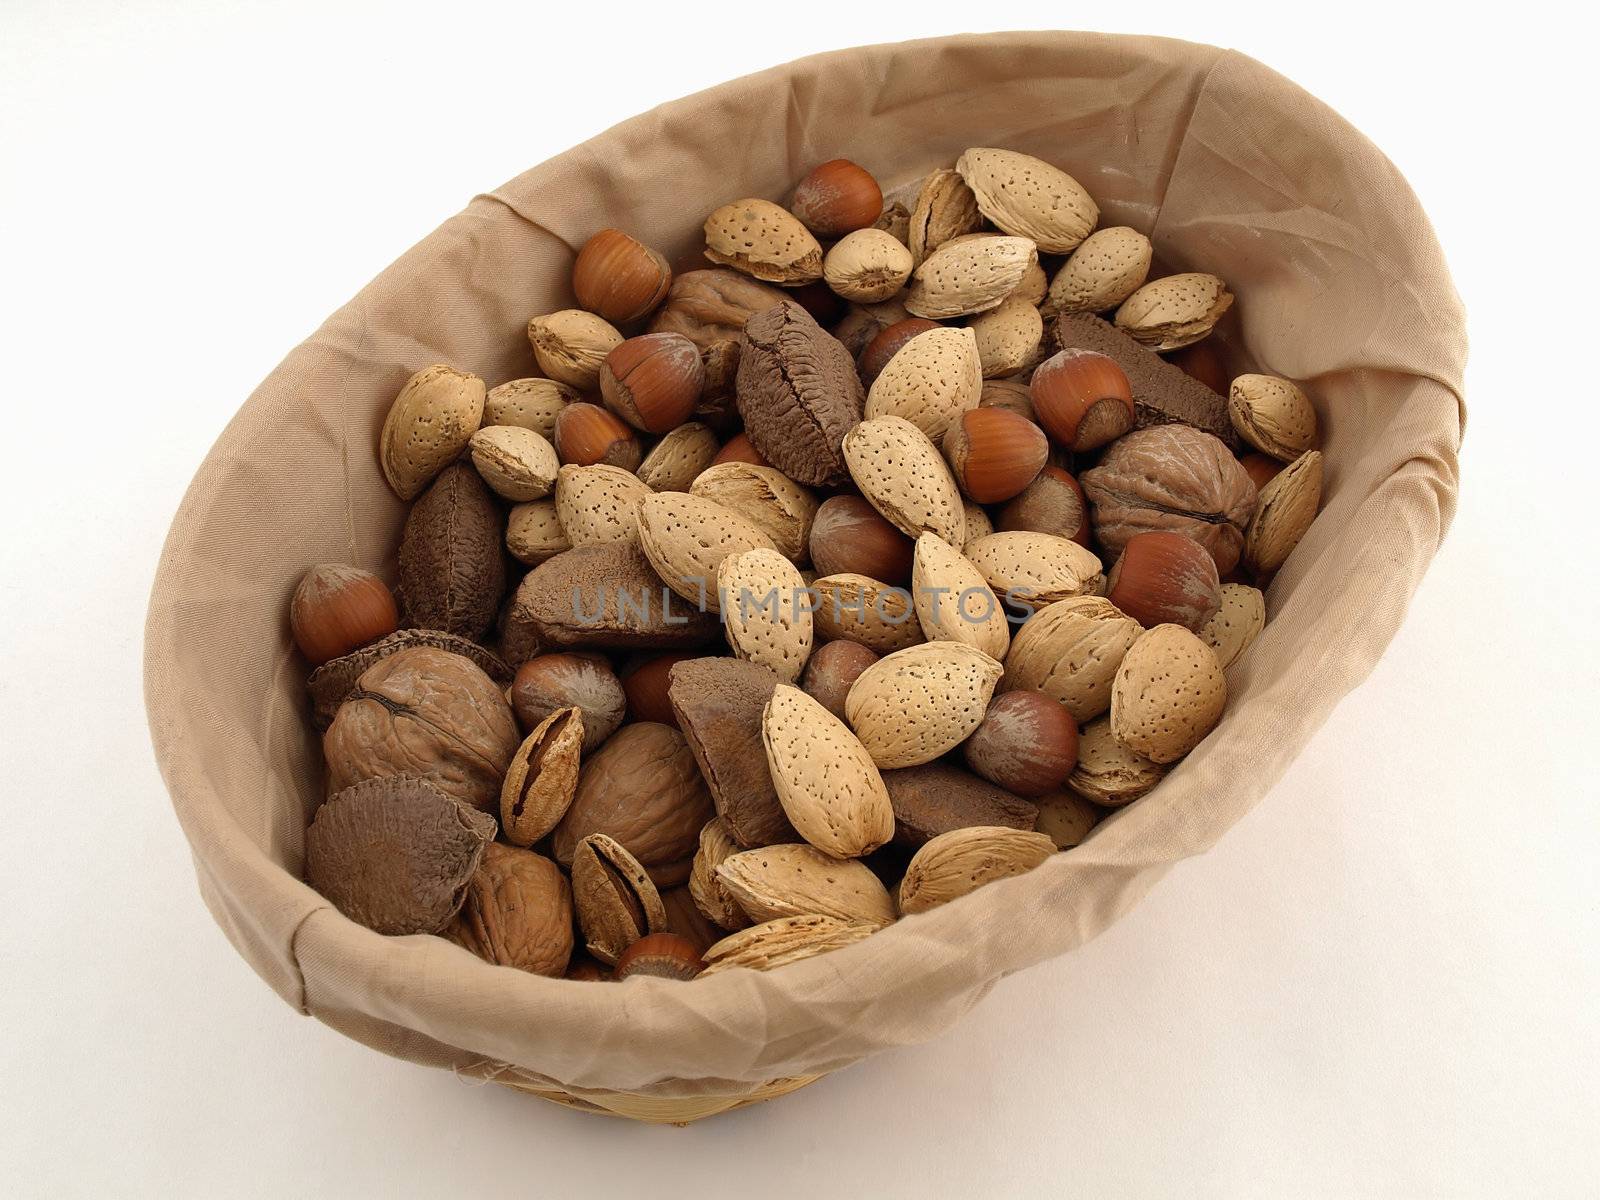 Various nuts in a cloth covered basket. Over a white background.